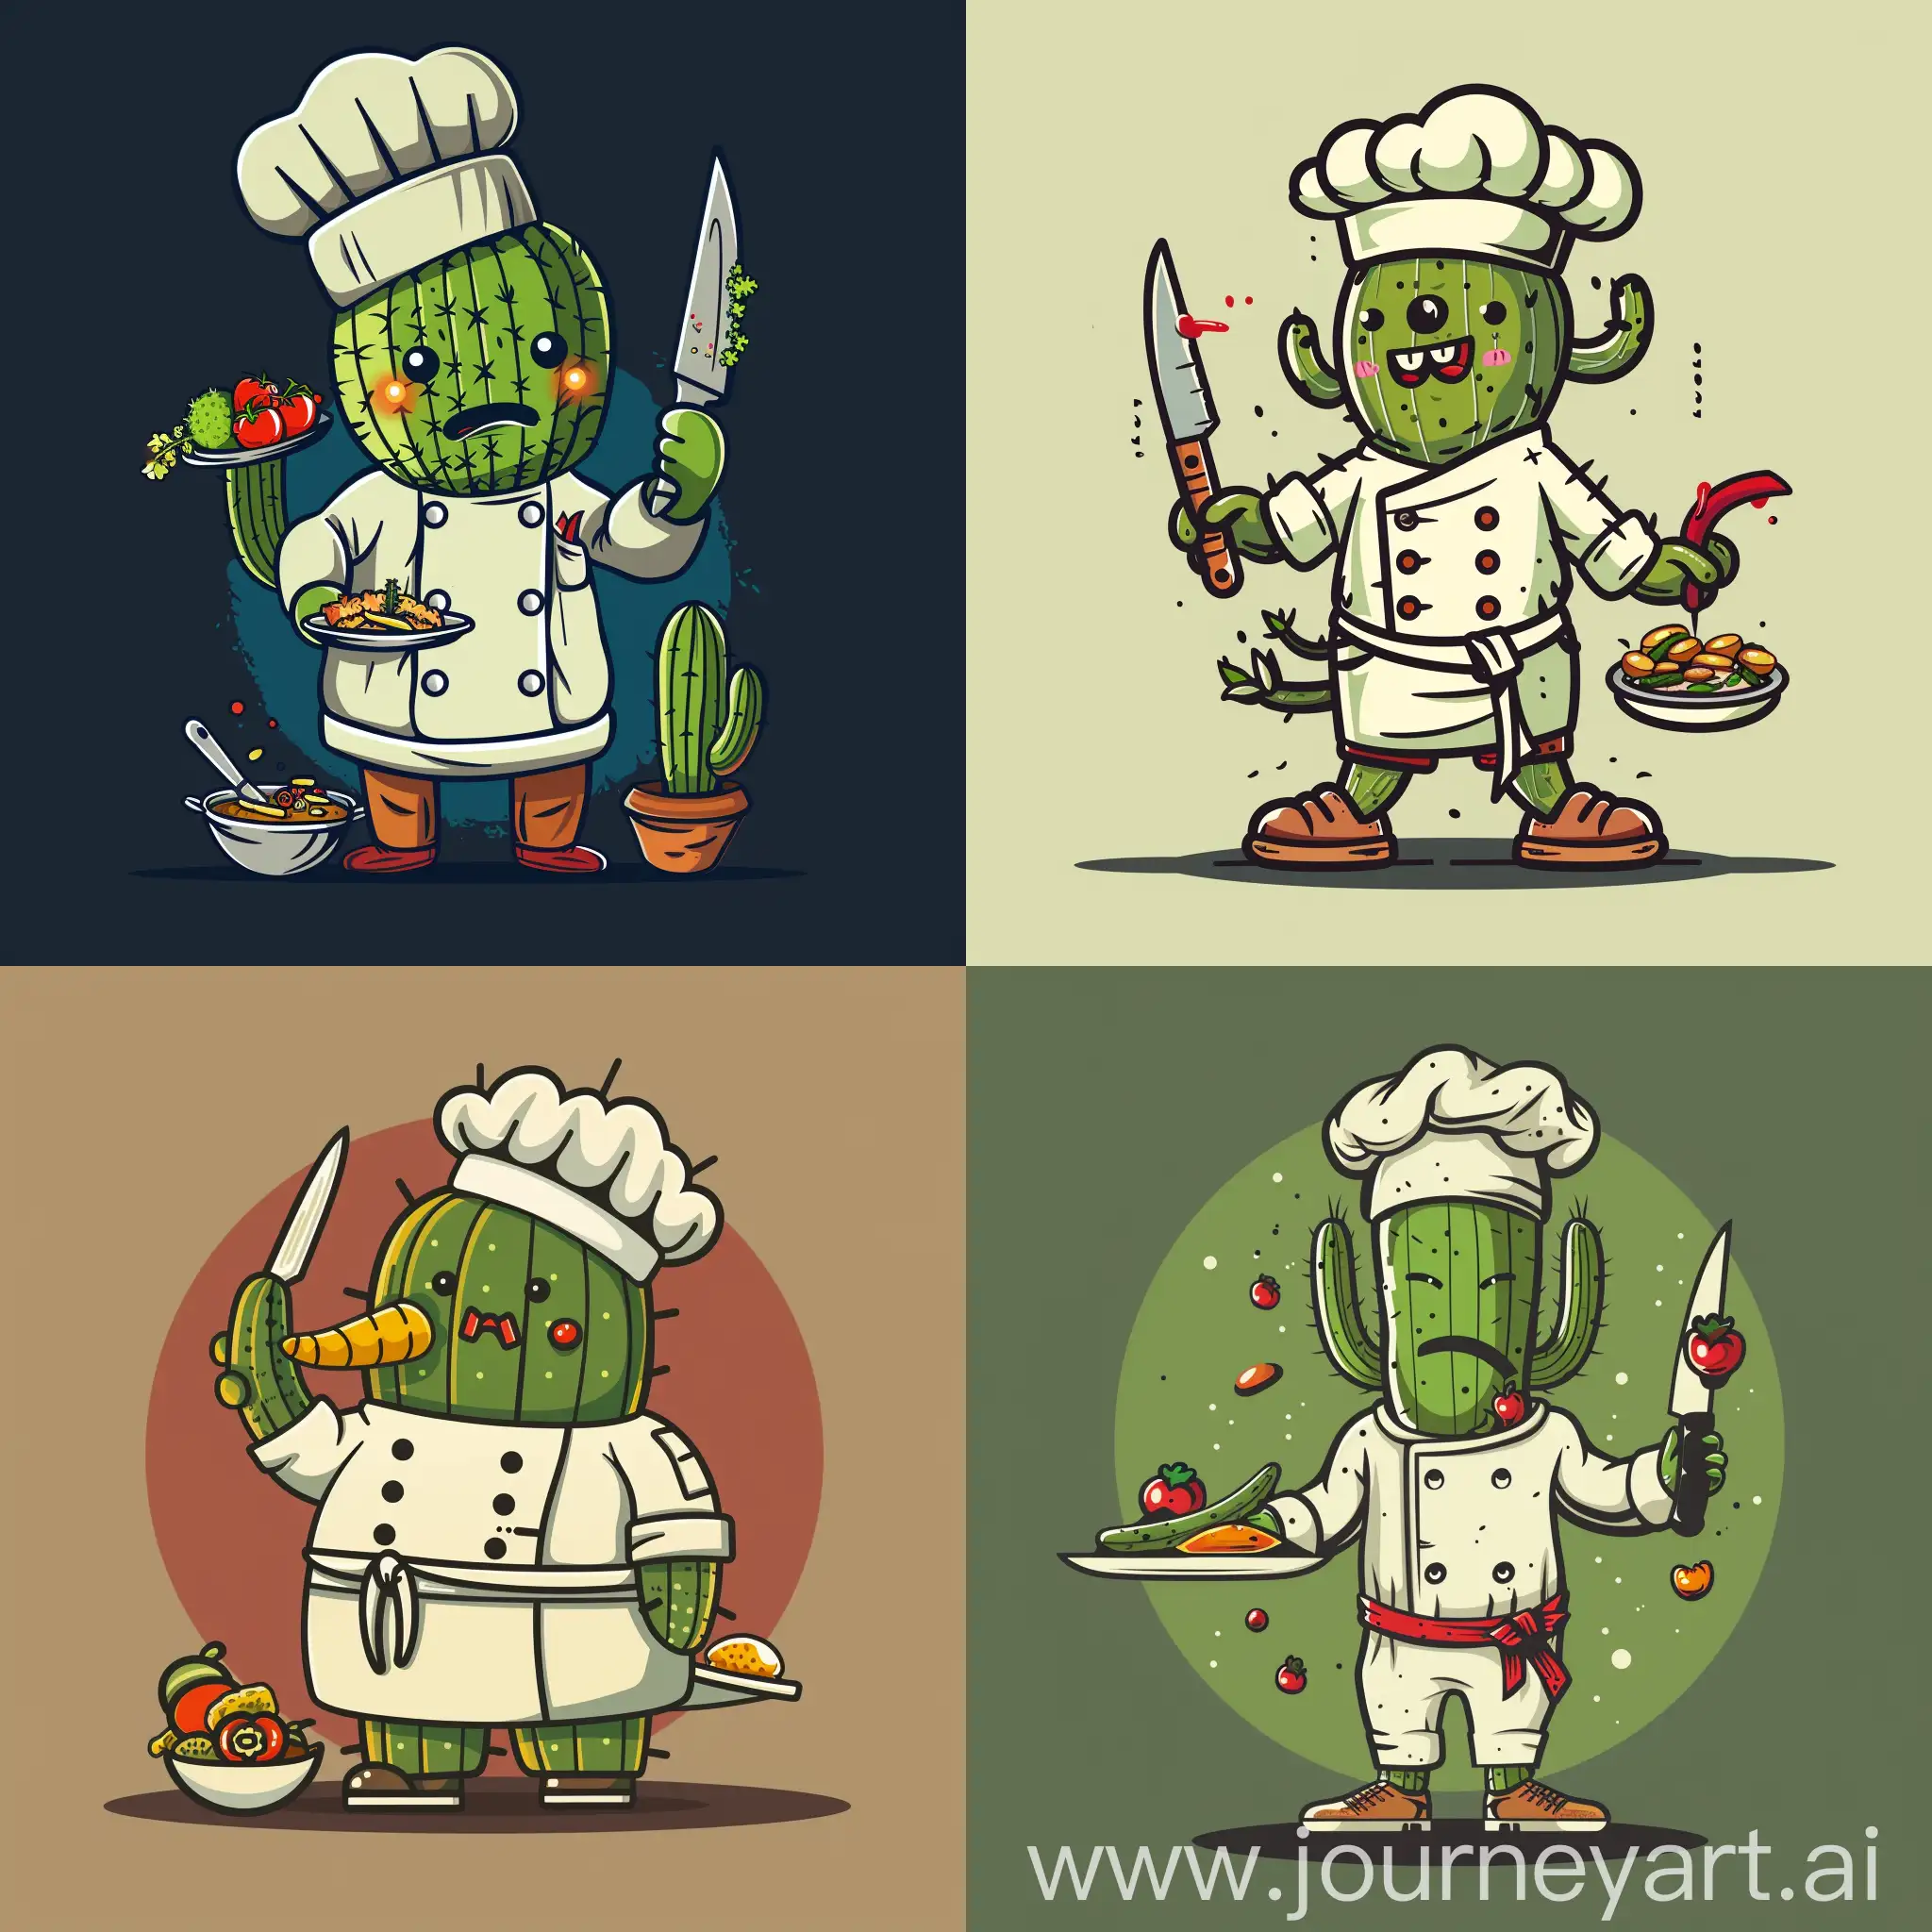 a cactus wearing a chef uniform holding a knife and food, logo